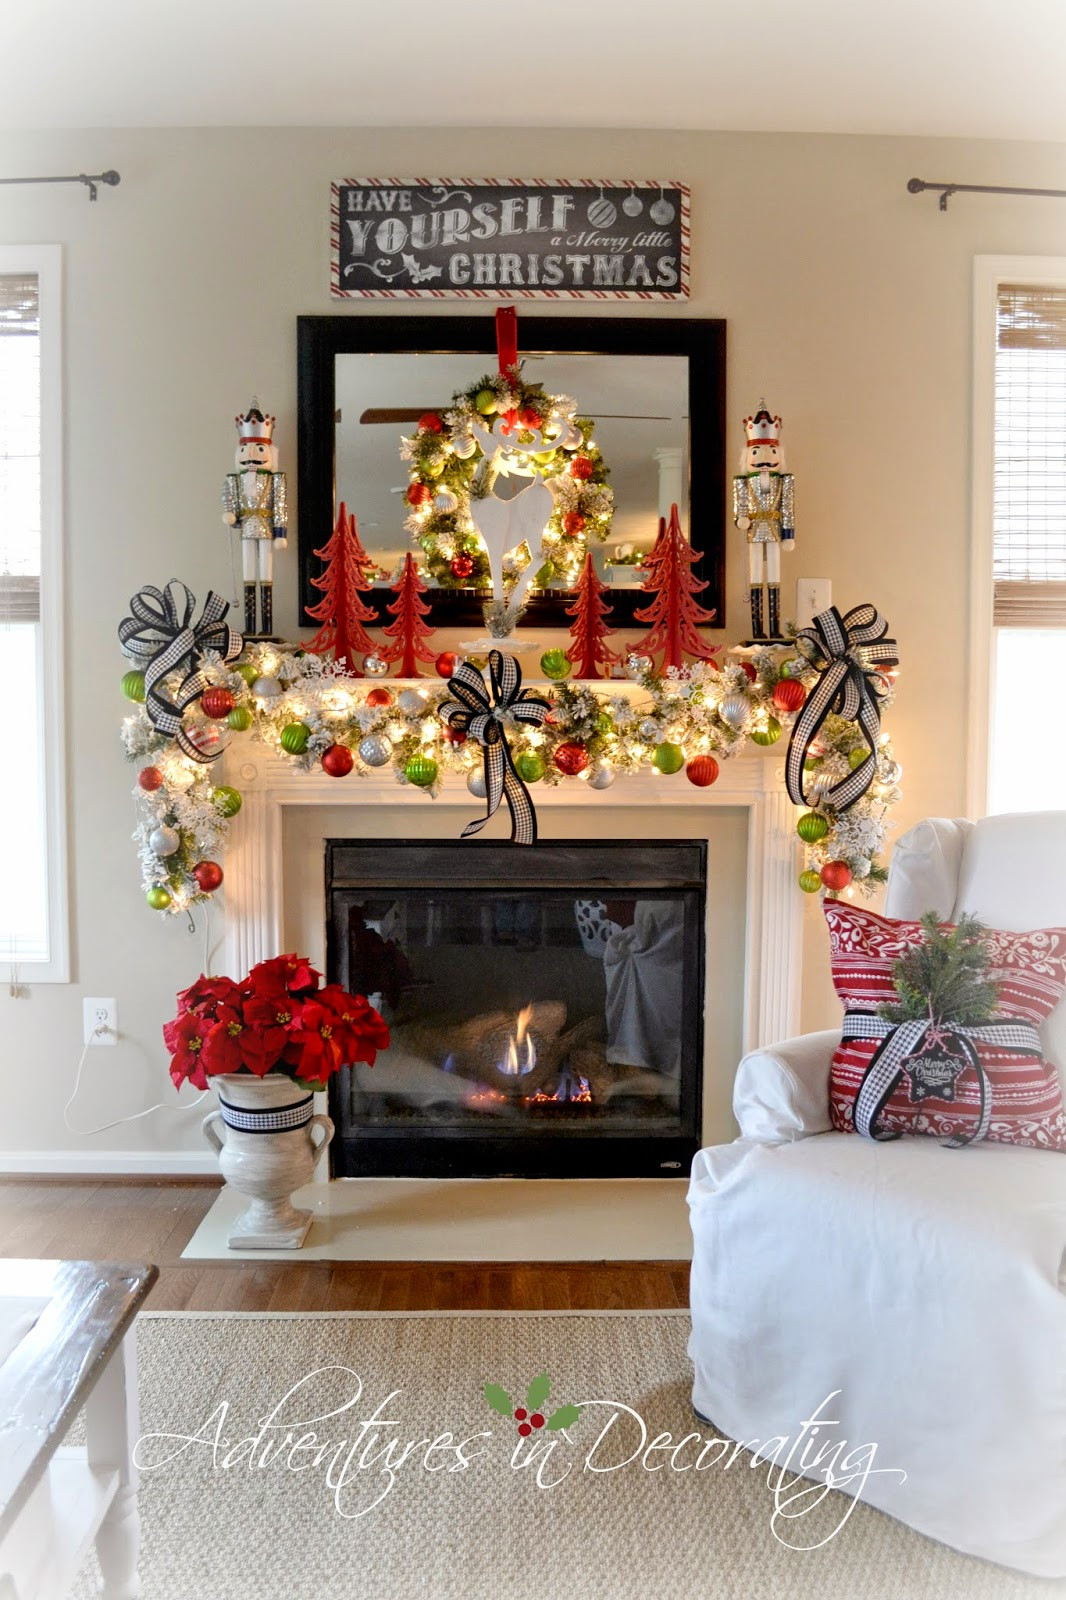 Christmas Fireplace Mantel
 Adventures in Decorating Our 2014 Christmas Mantel and